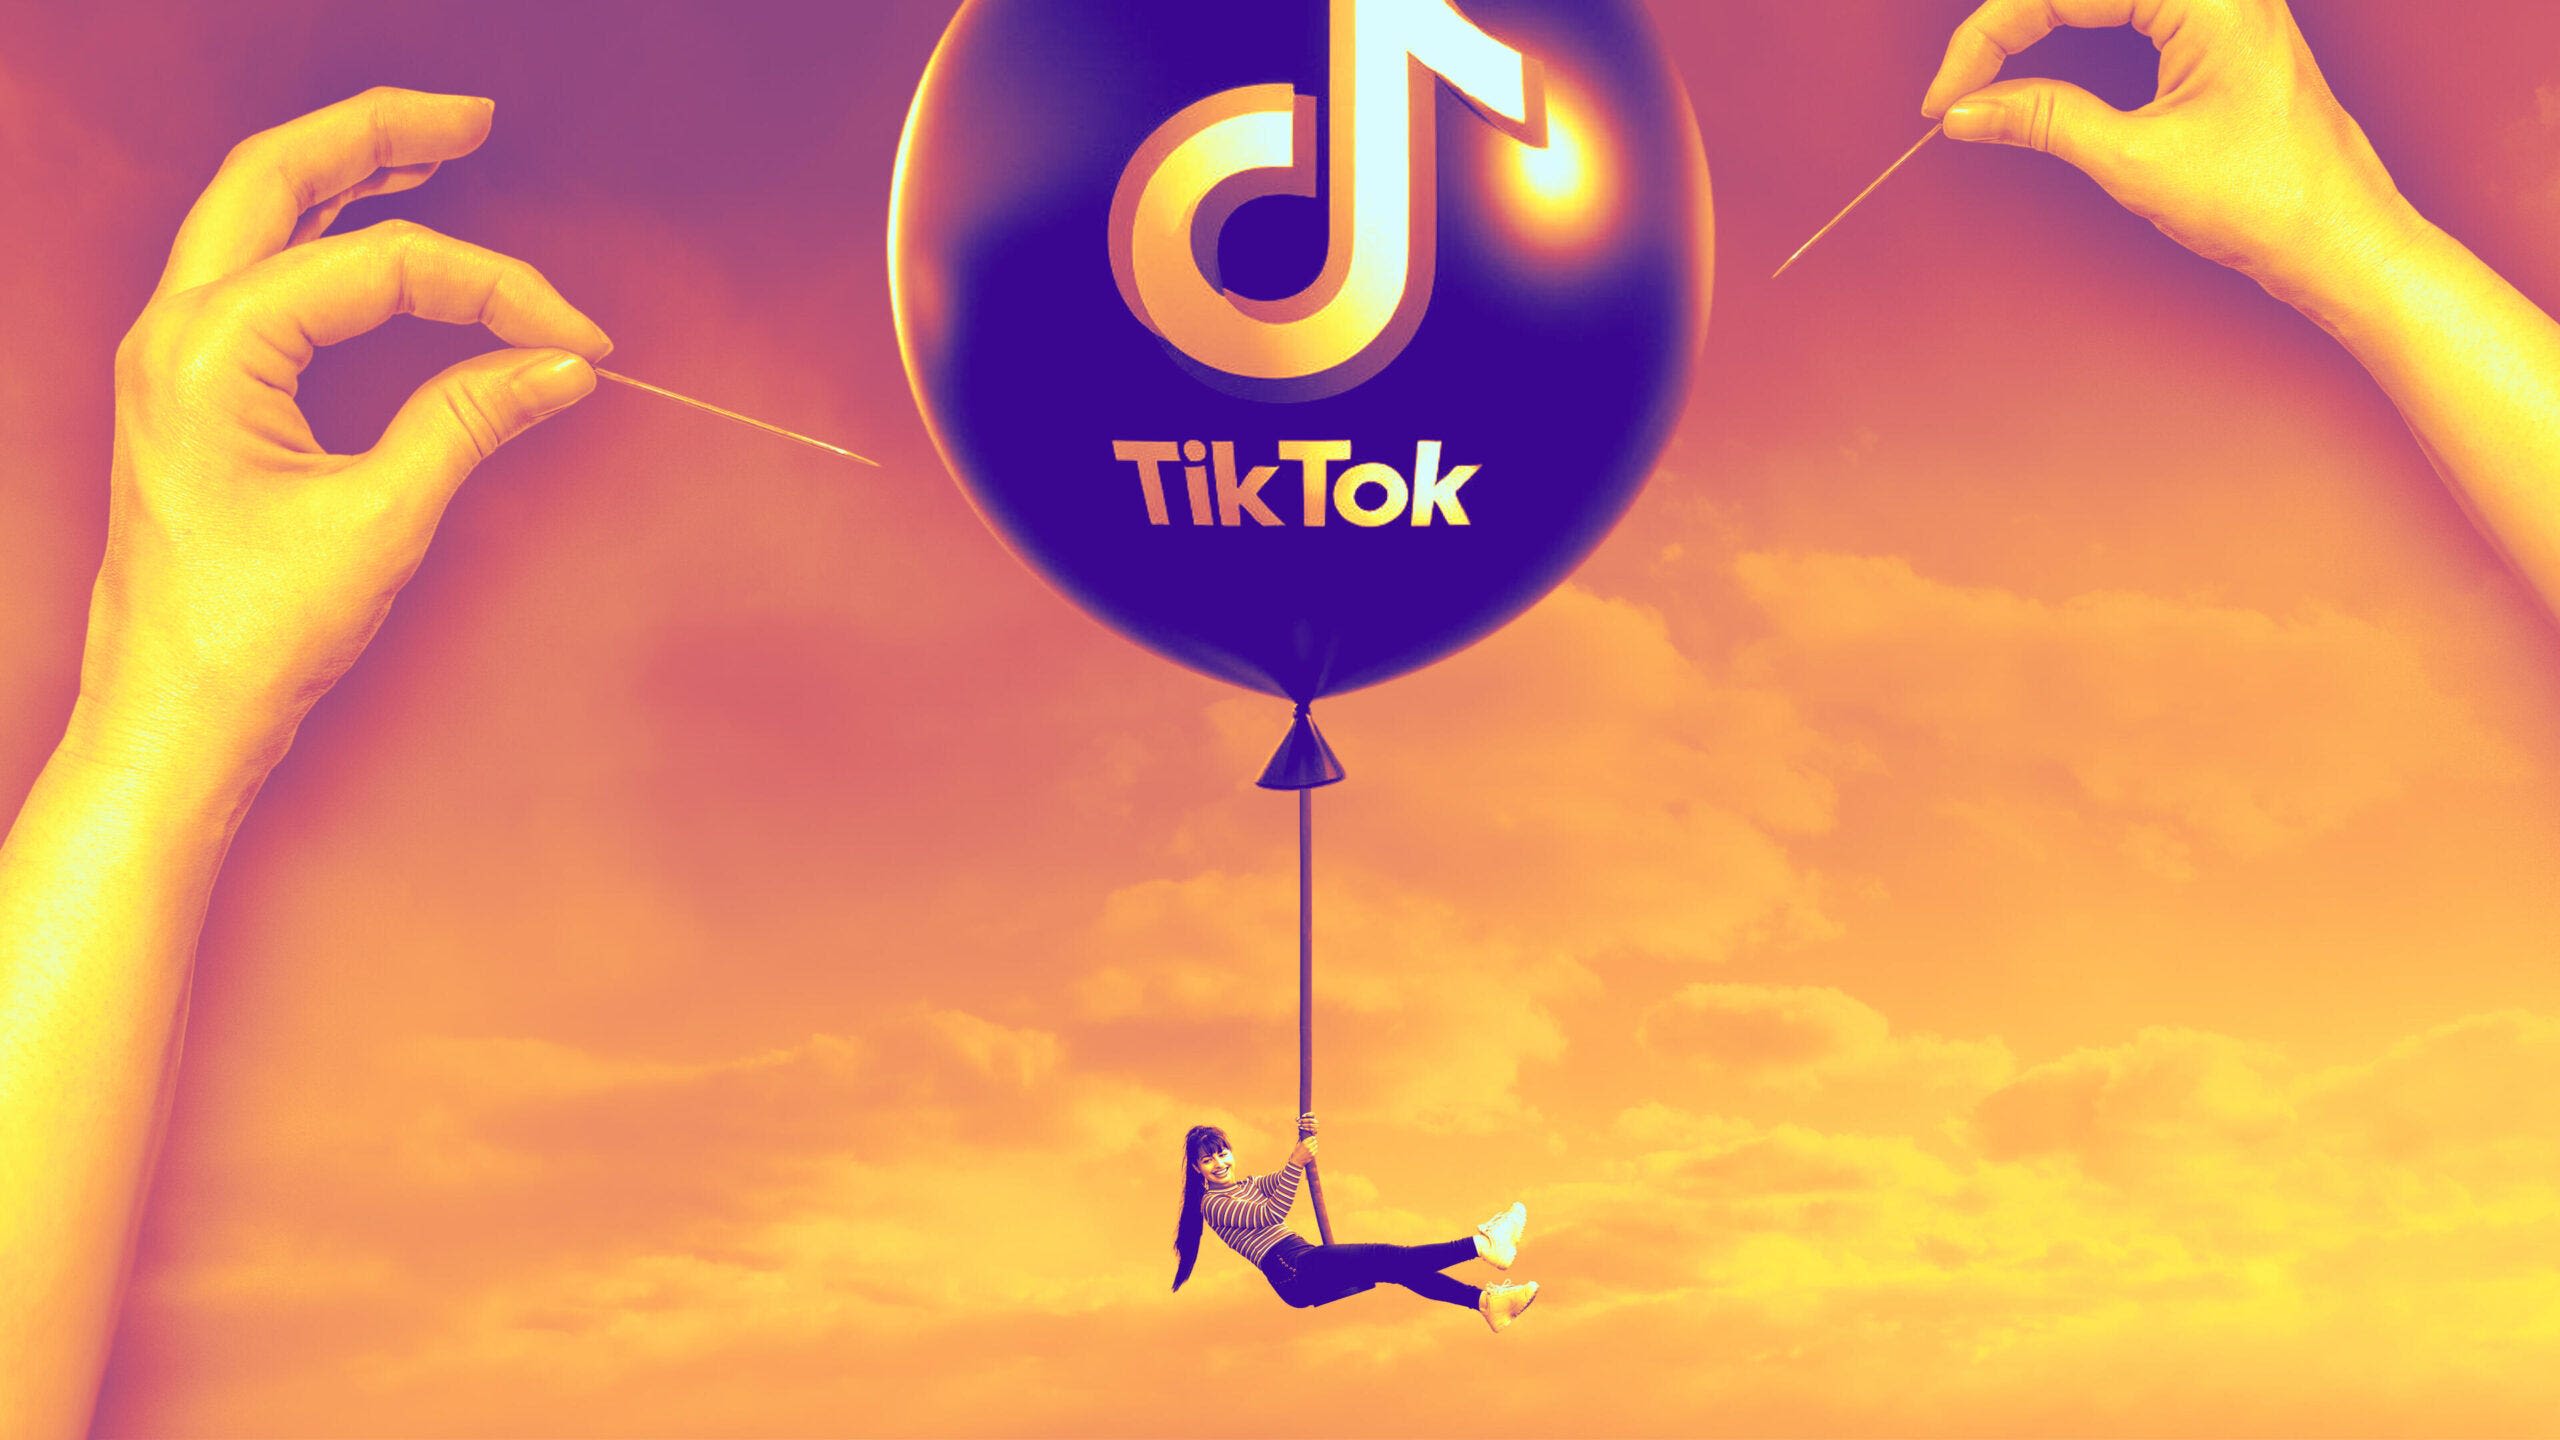 TikTok Ban Threatens Creator Economy: 'There Is No Way I'd Have a Functioning Business'